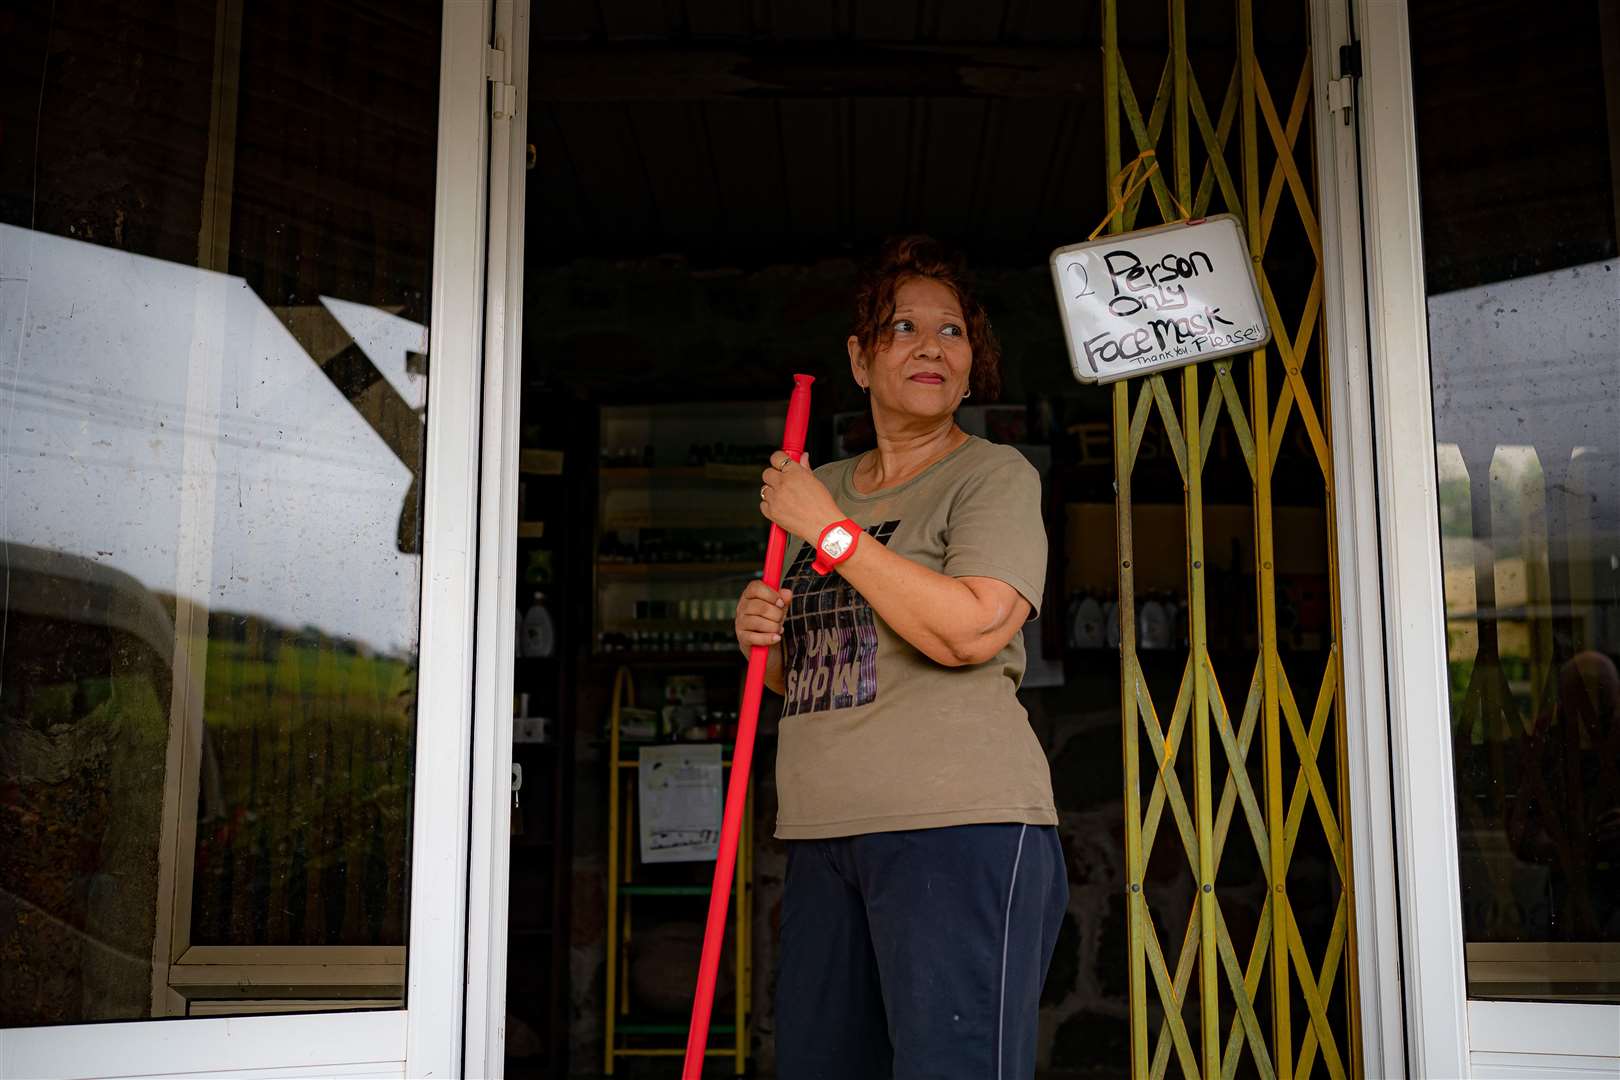 Essential oil producer Maryline Manczak waits outside her boutique for passing customers (Ben Birchall/PA)